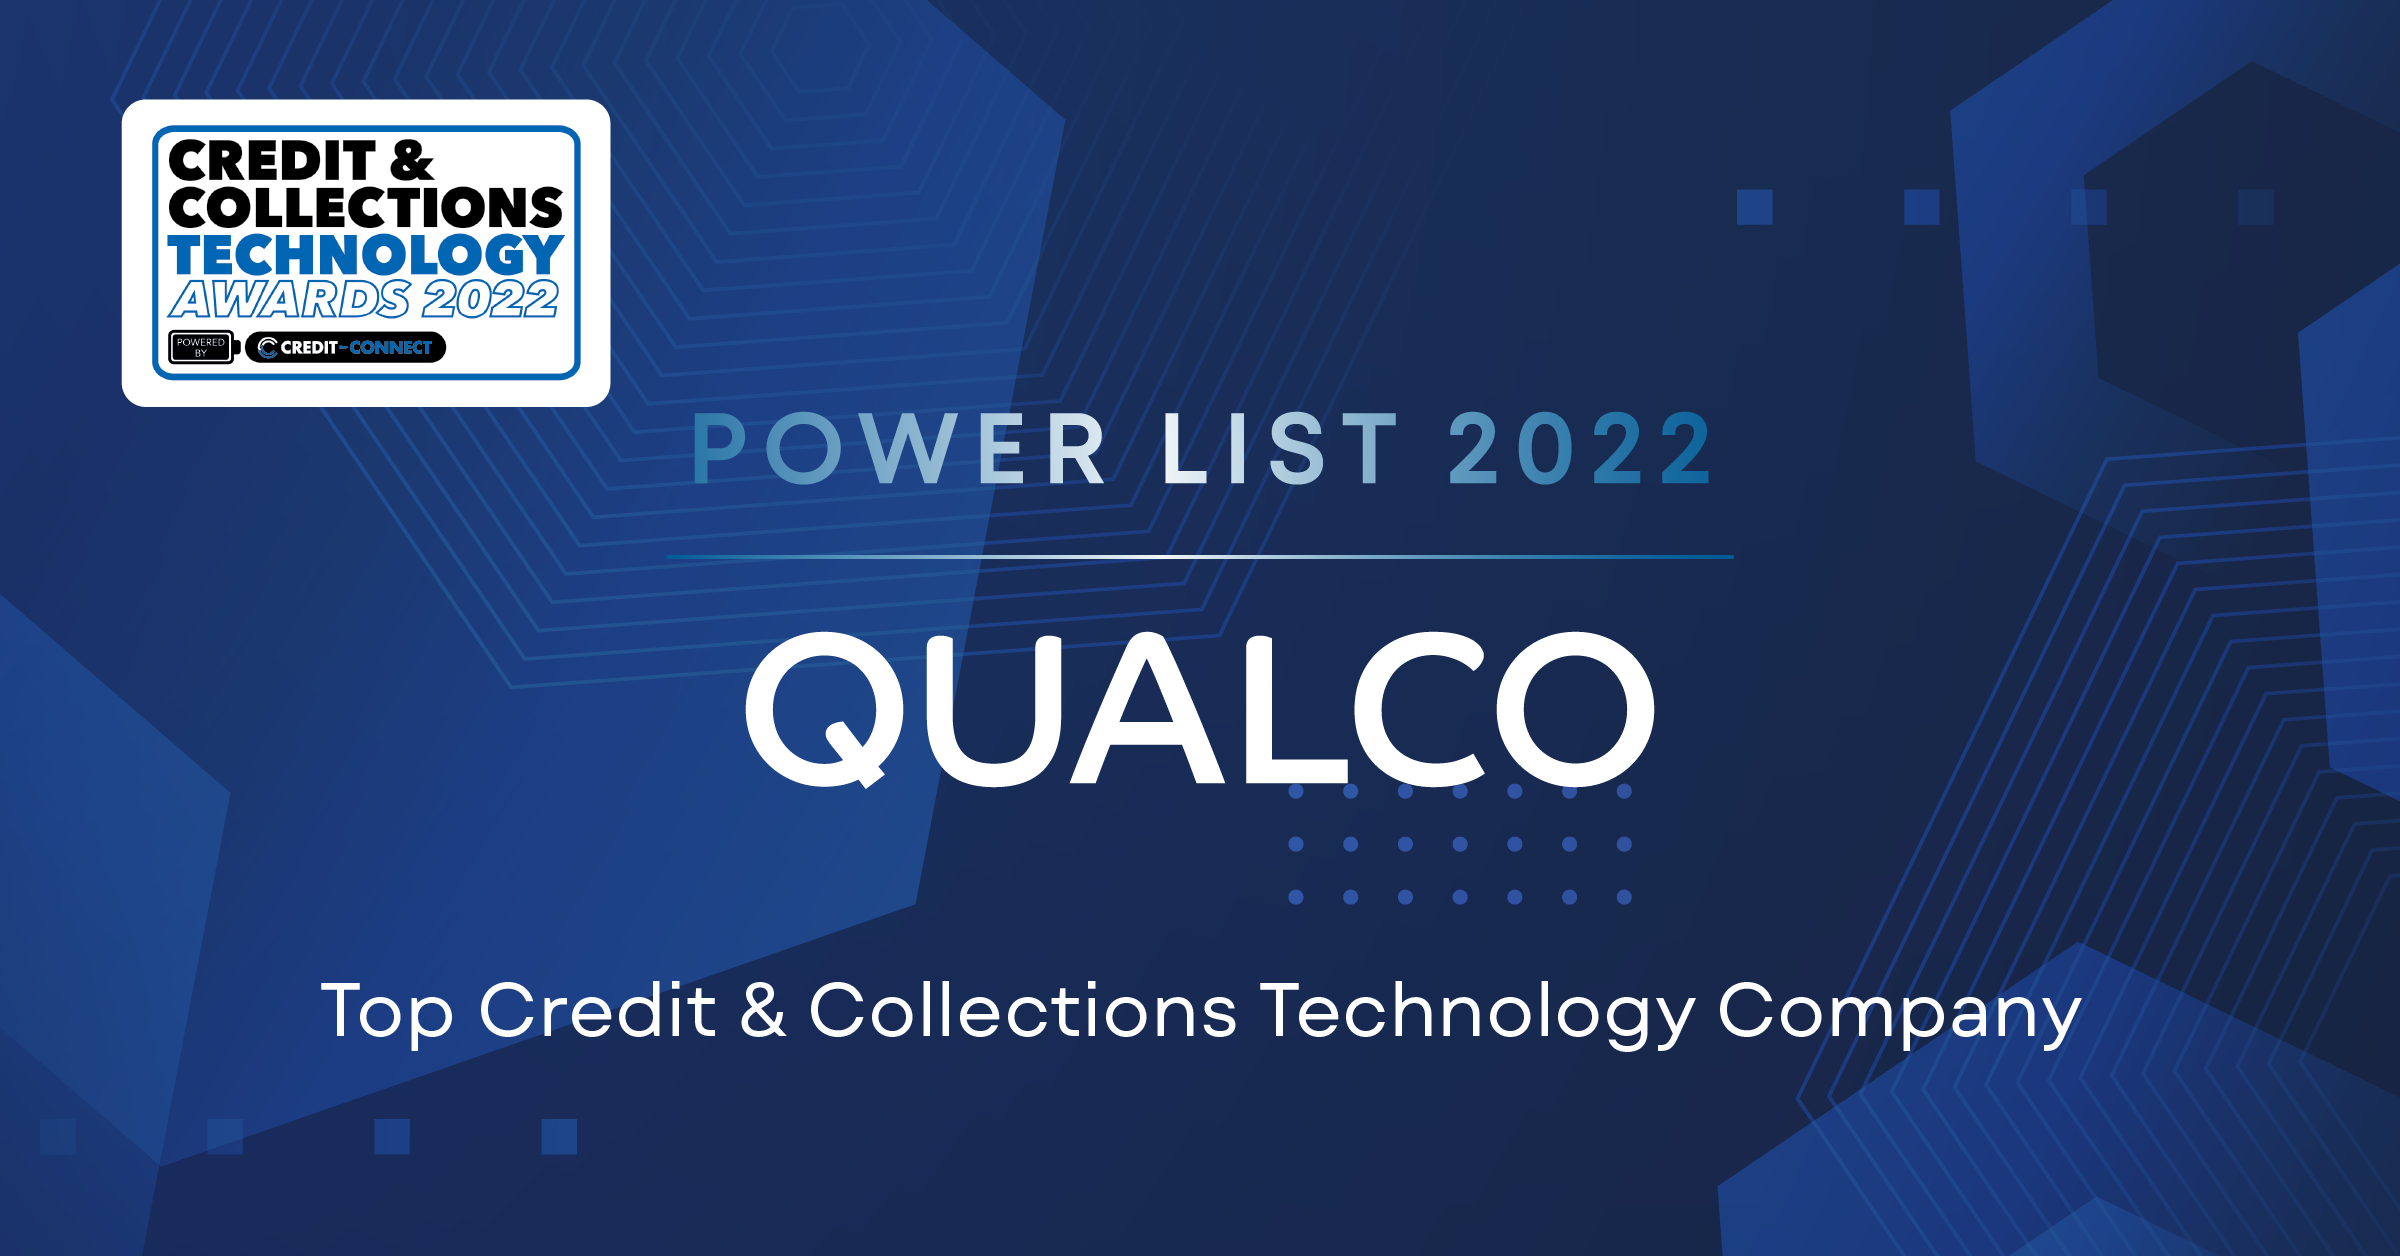 QUALCO among the Τop-20 Credit & Collections Technology Innovation Companies in the UK